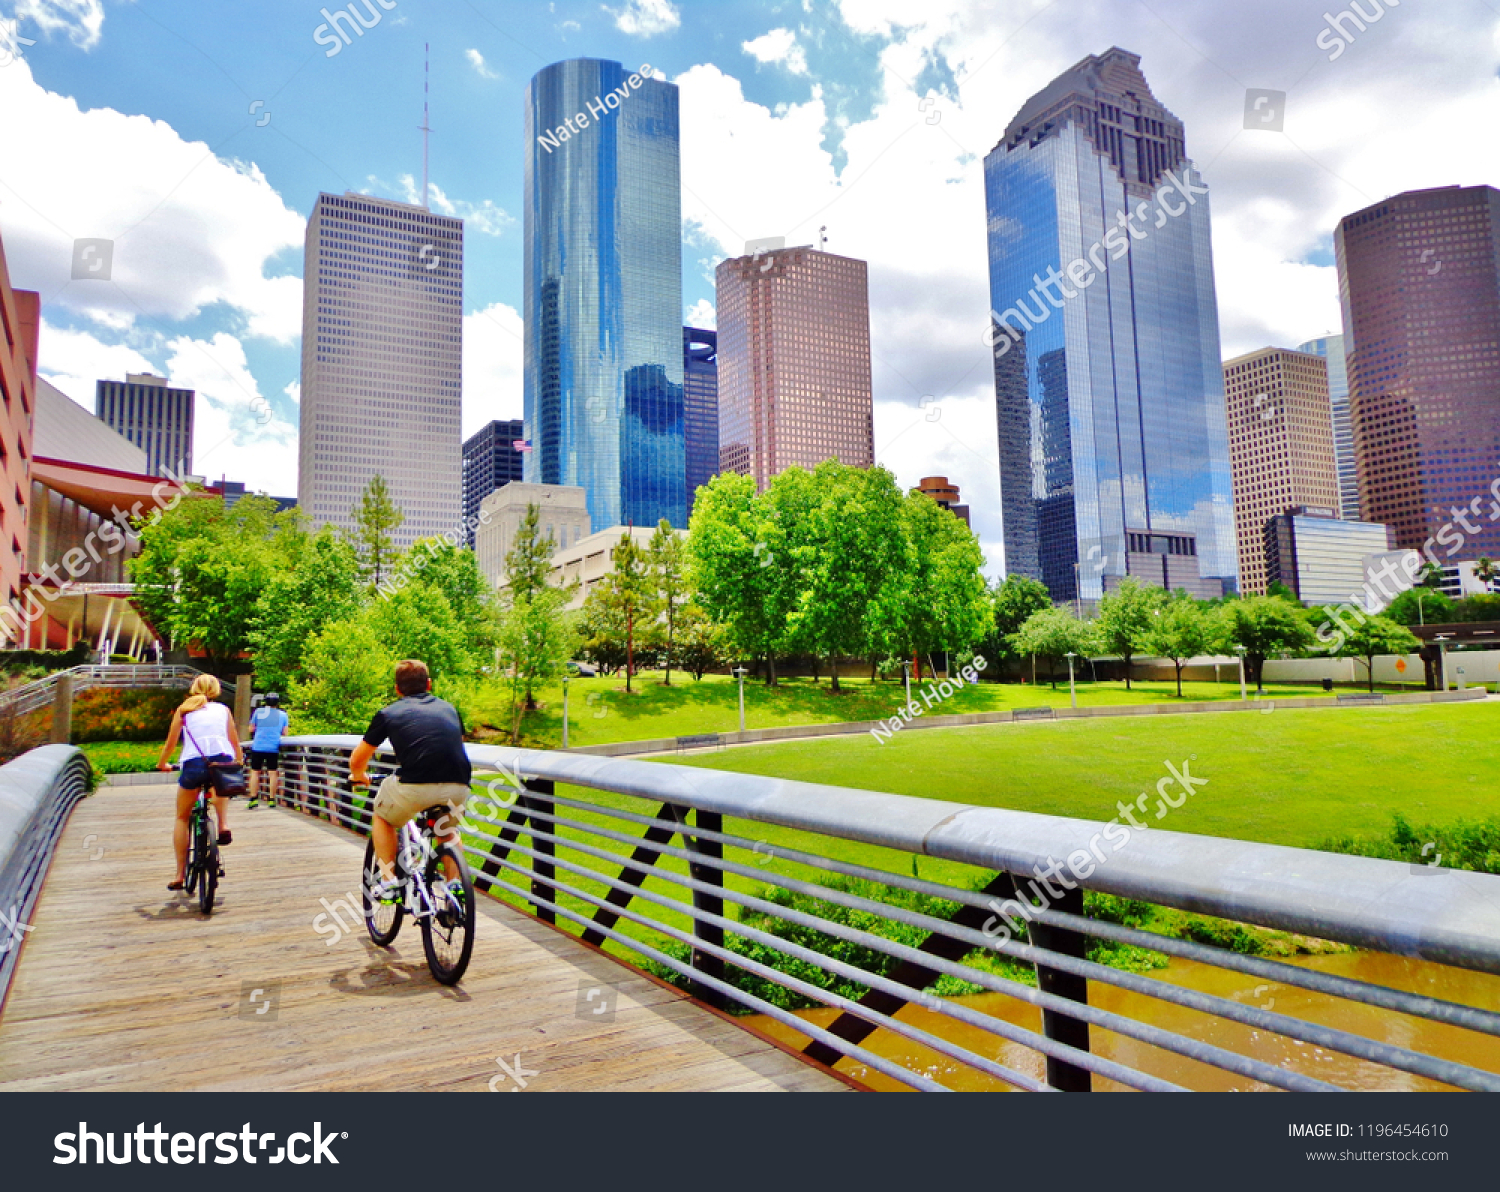 Bicyclists cross wooden bridge in Buffalo Bayou Park, with a beautiful view of downtown Houston (skyline / skyscrapers) in background on a summer day - Houston, Texas, USA  #1196454610